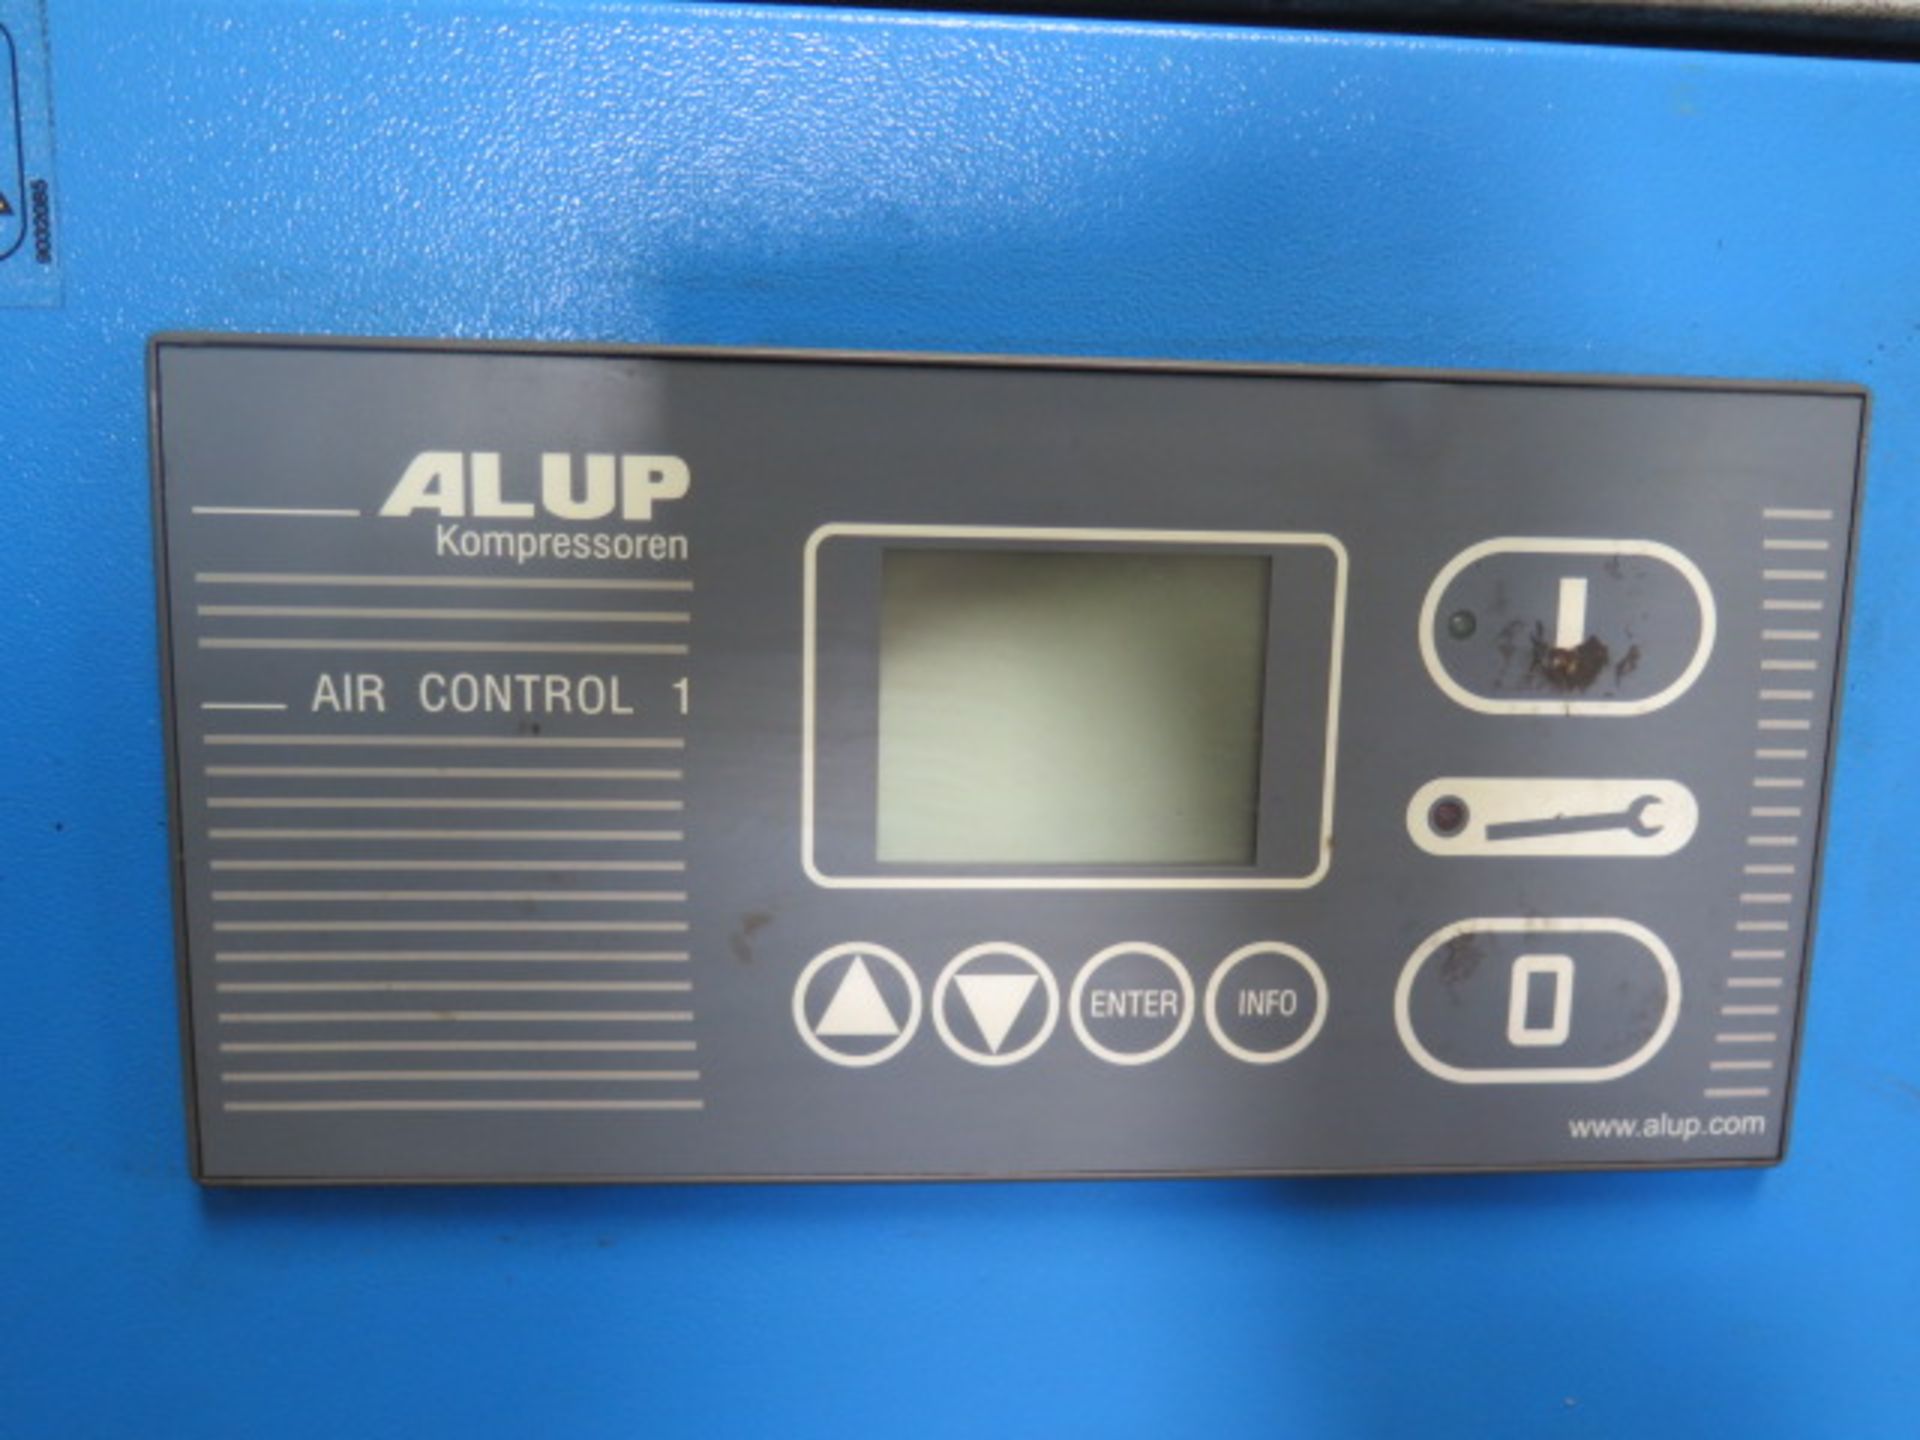 Alup COMBI II mdl. C25255 25Hp Rotary Air Comp s/n HOP250016 w/ Alup Digital Controls, SOLD AS IS - Bild 4 aus 10